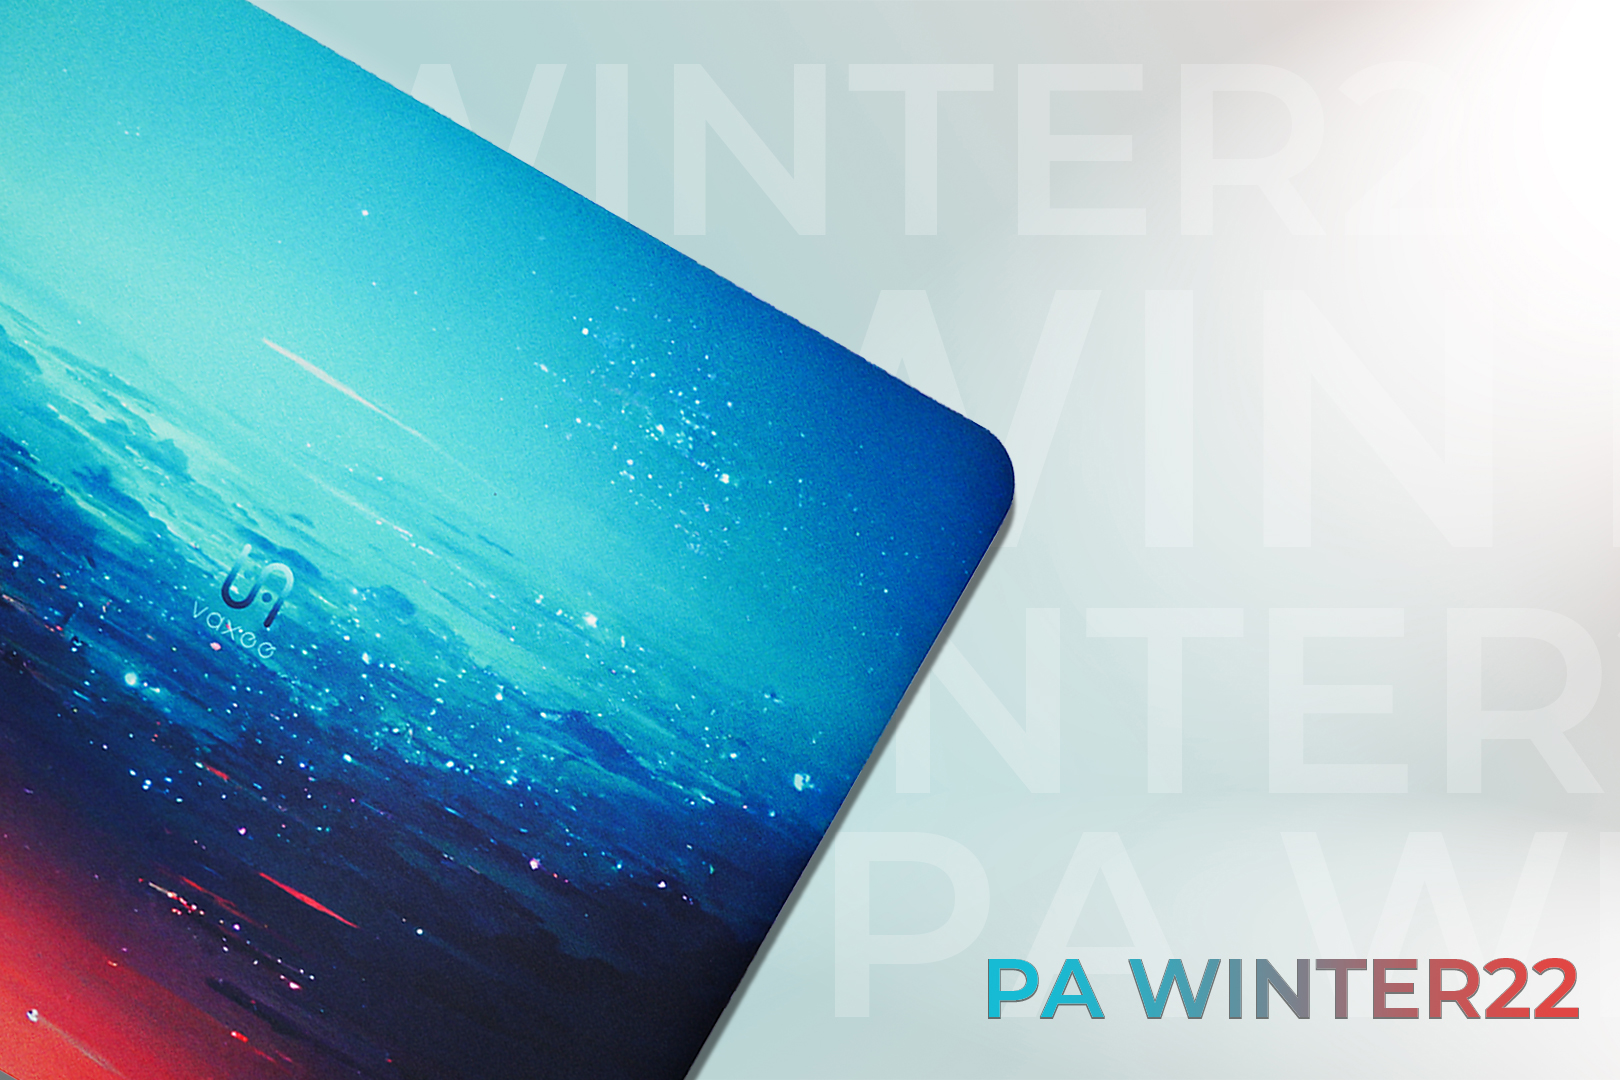 VAXEE PA “Winter22” is about to be available_News_Latest News